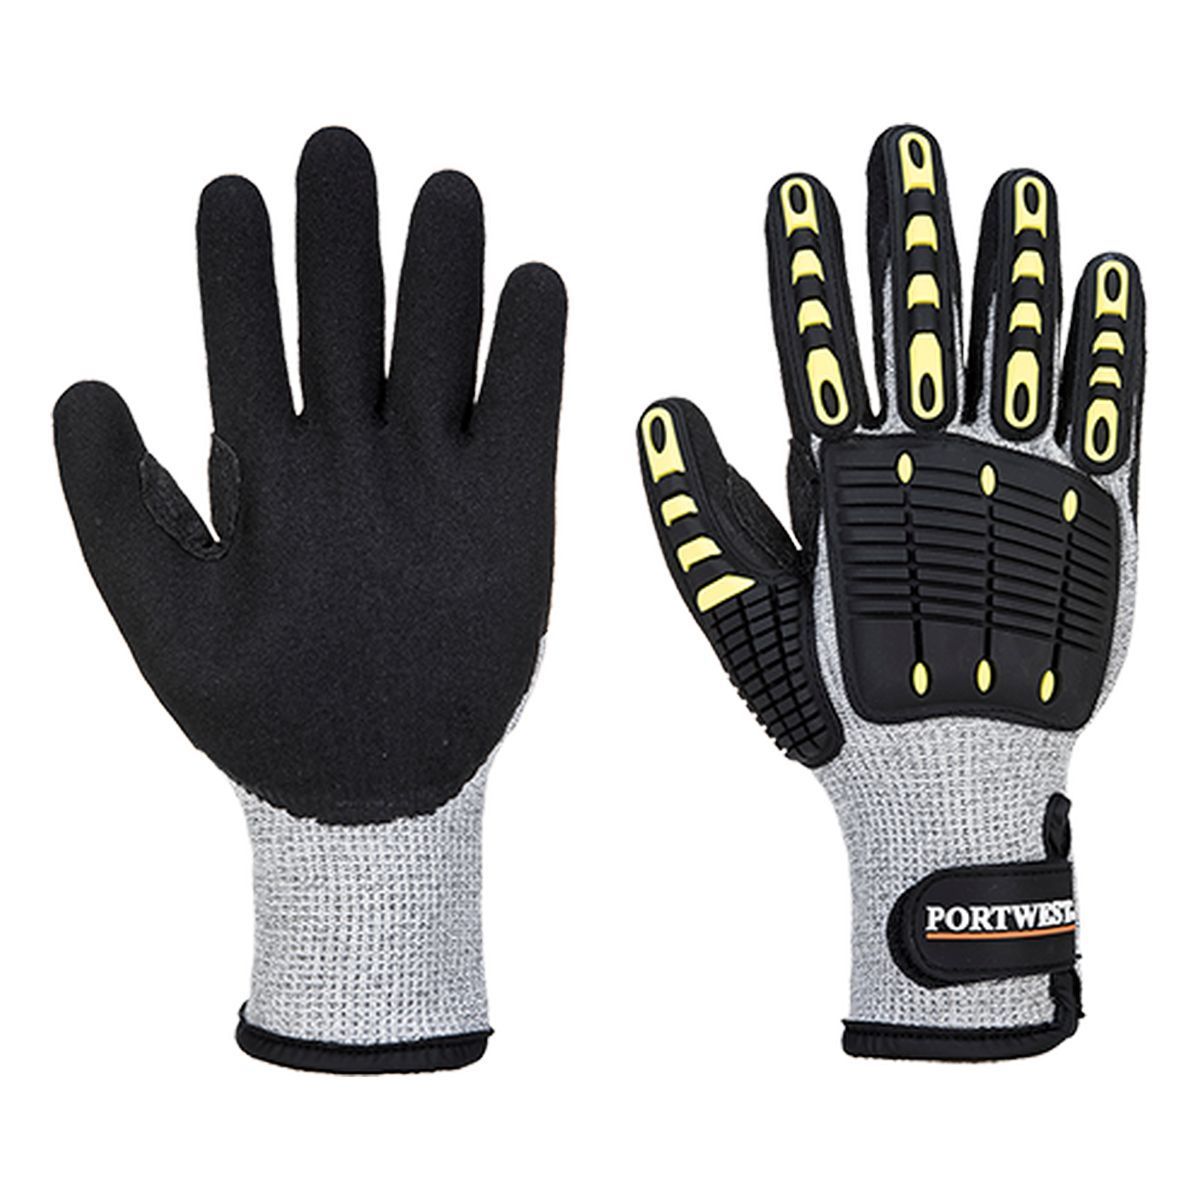 Portwest Anti Impact Cut Therm Resistant Glove, Grey/Black, Small, A729G8RS